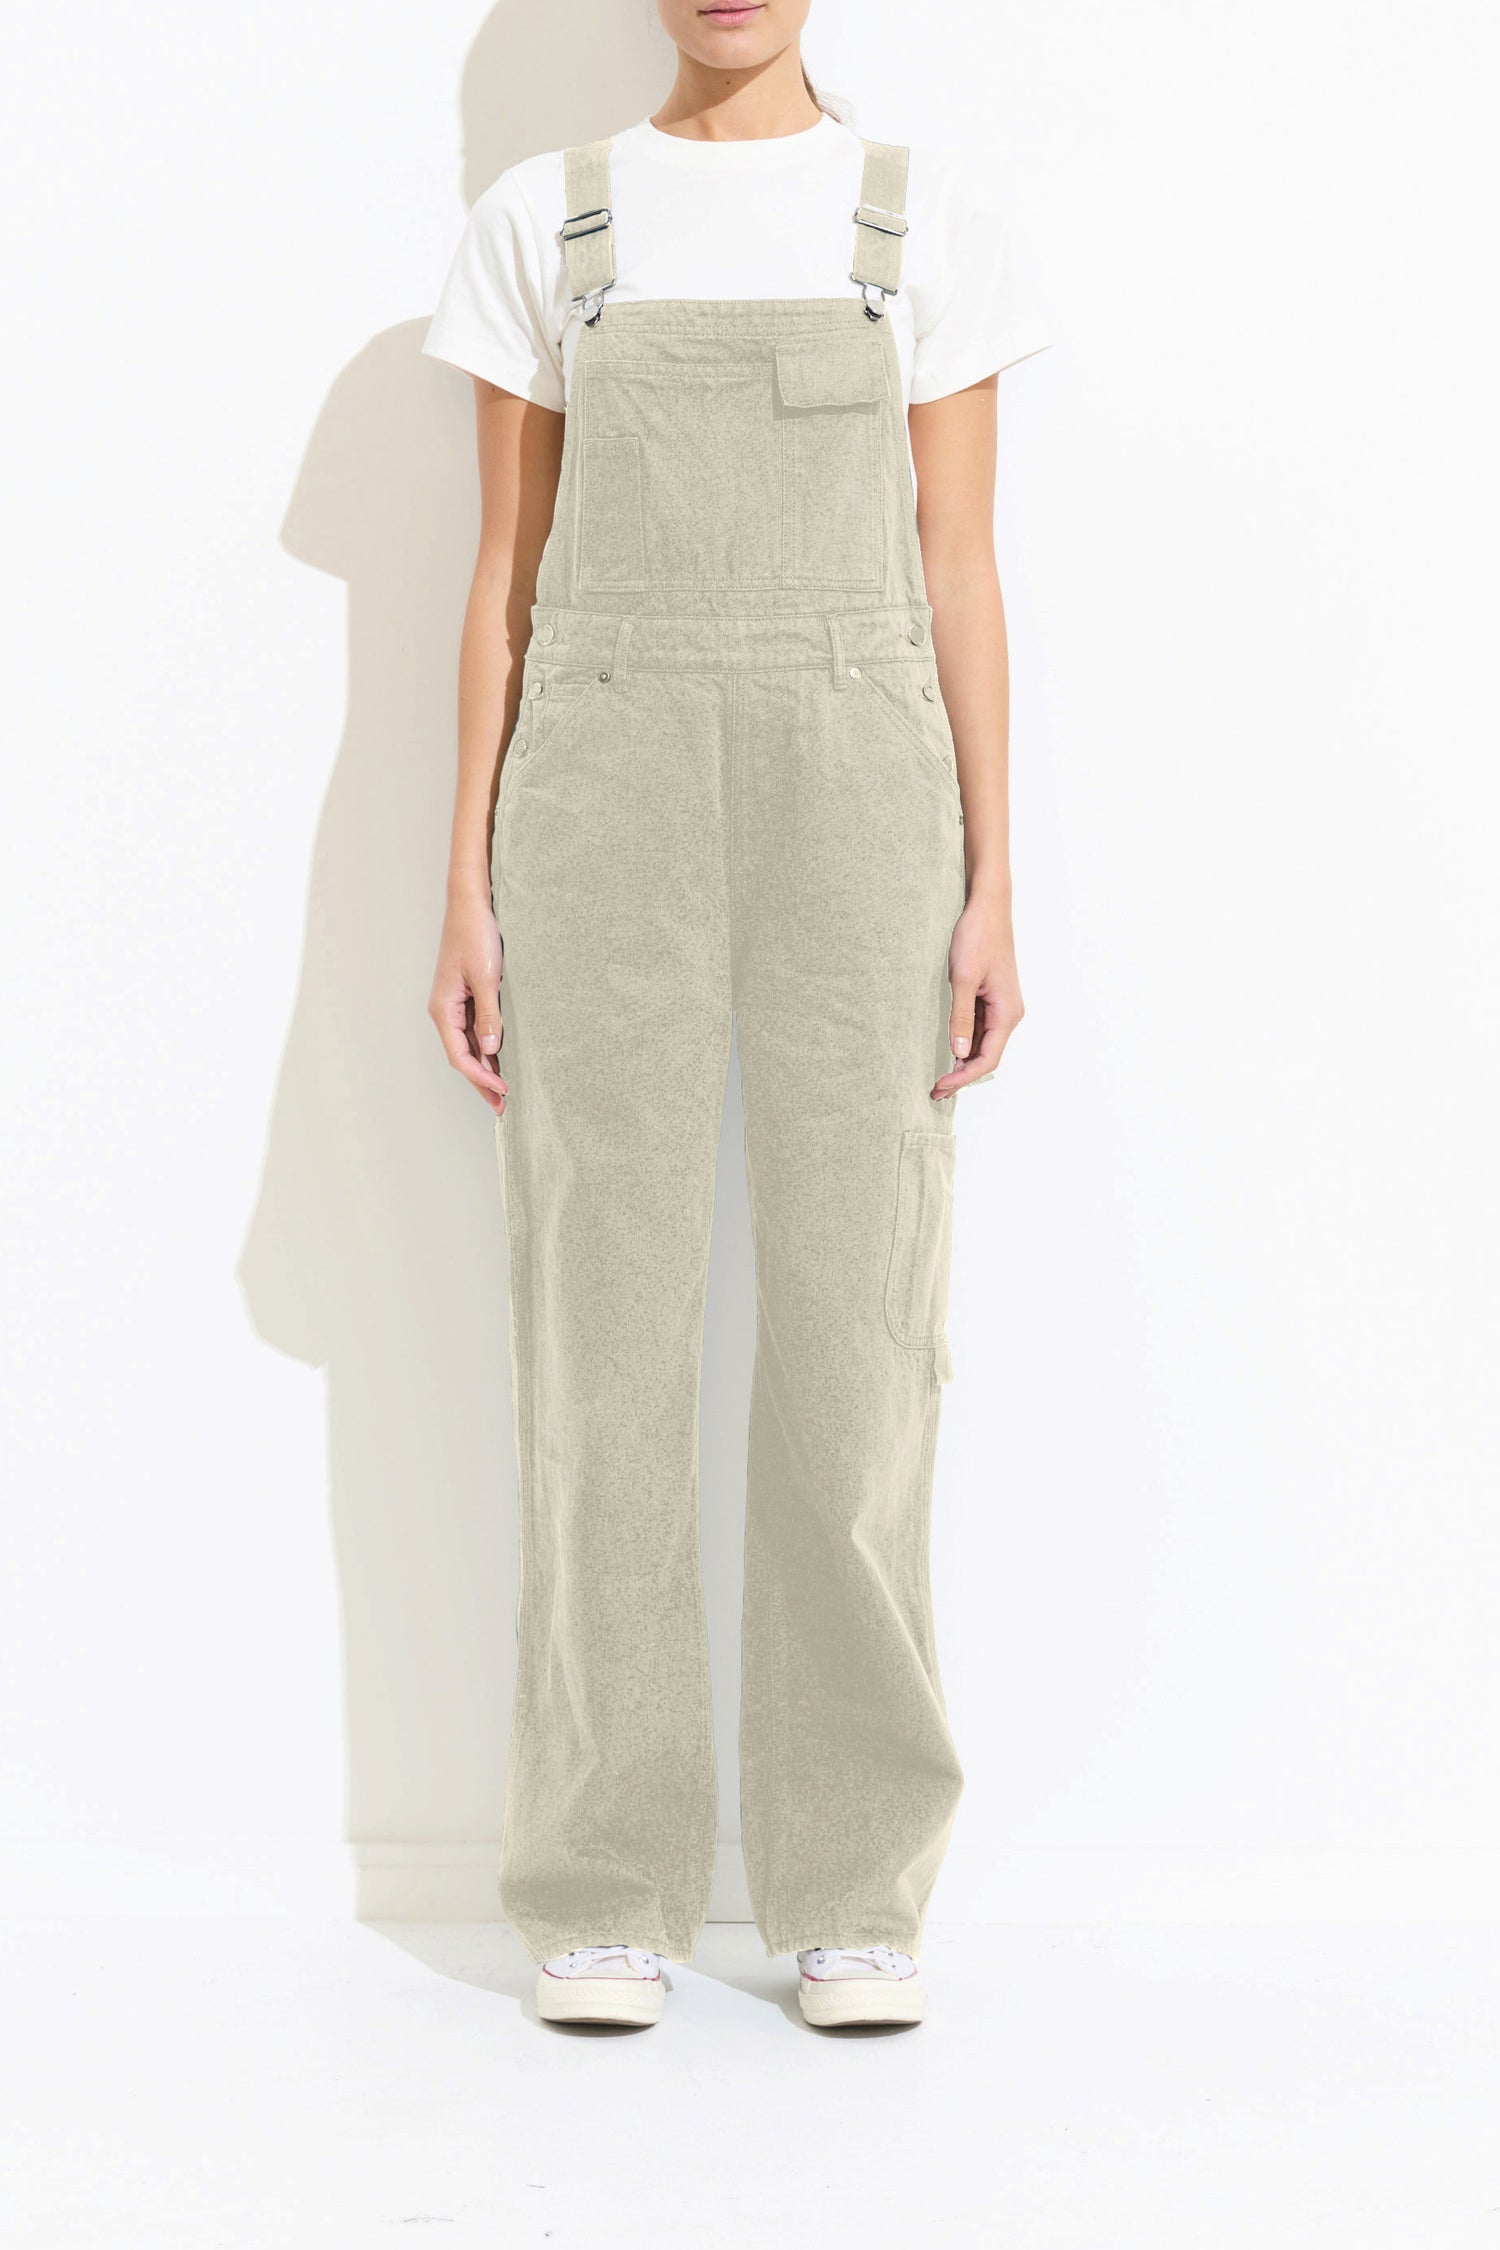 UNISEX MAKERS OVERALL - Mellow